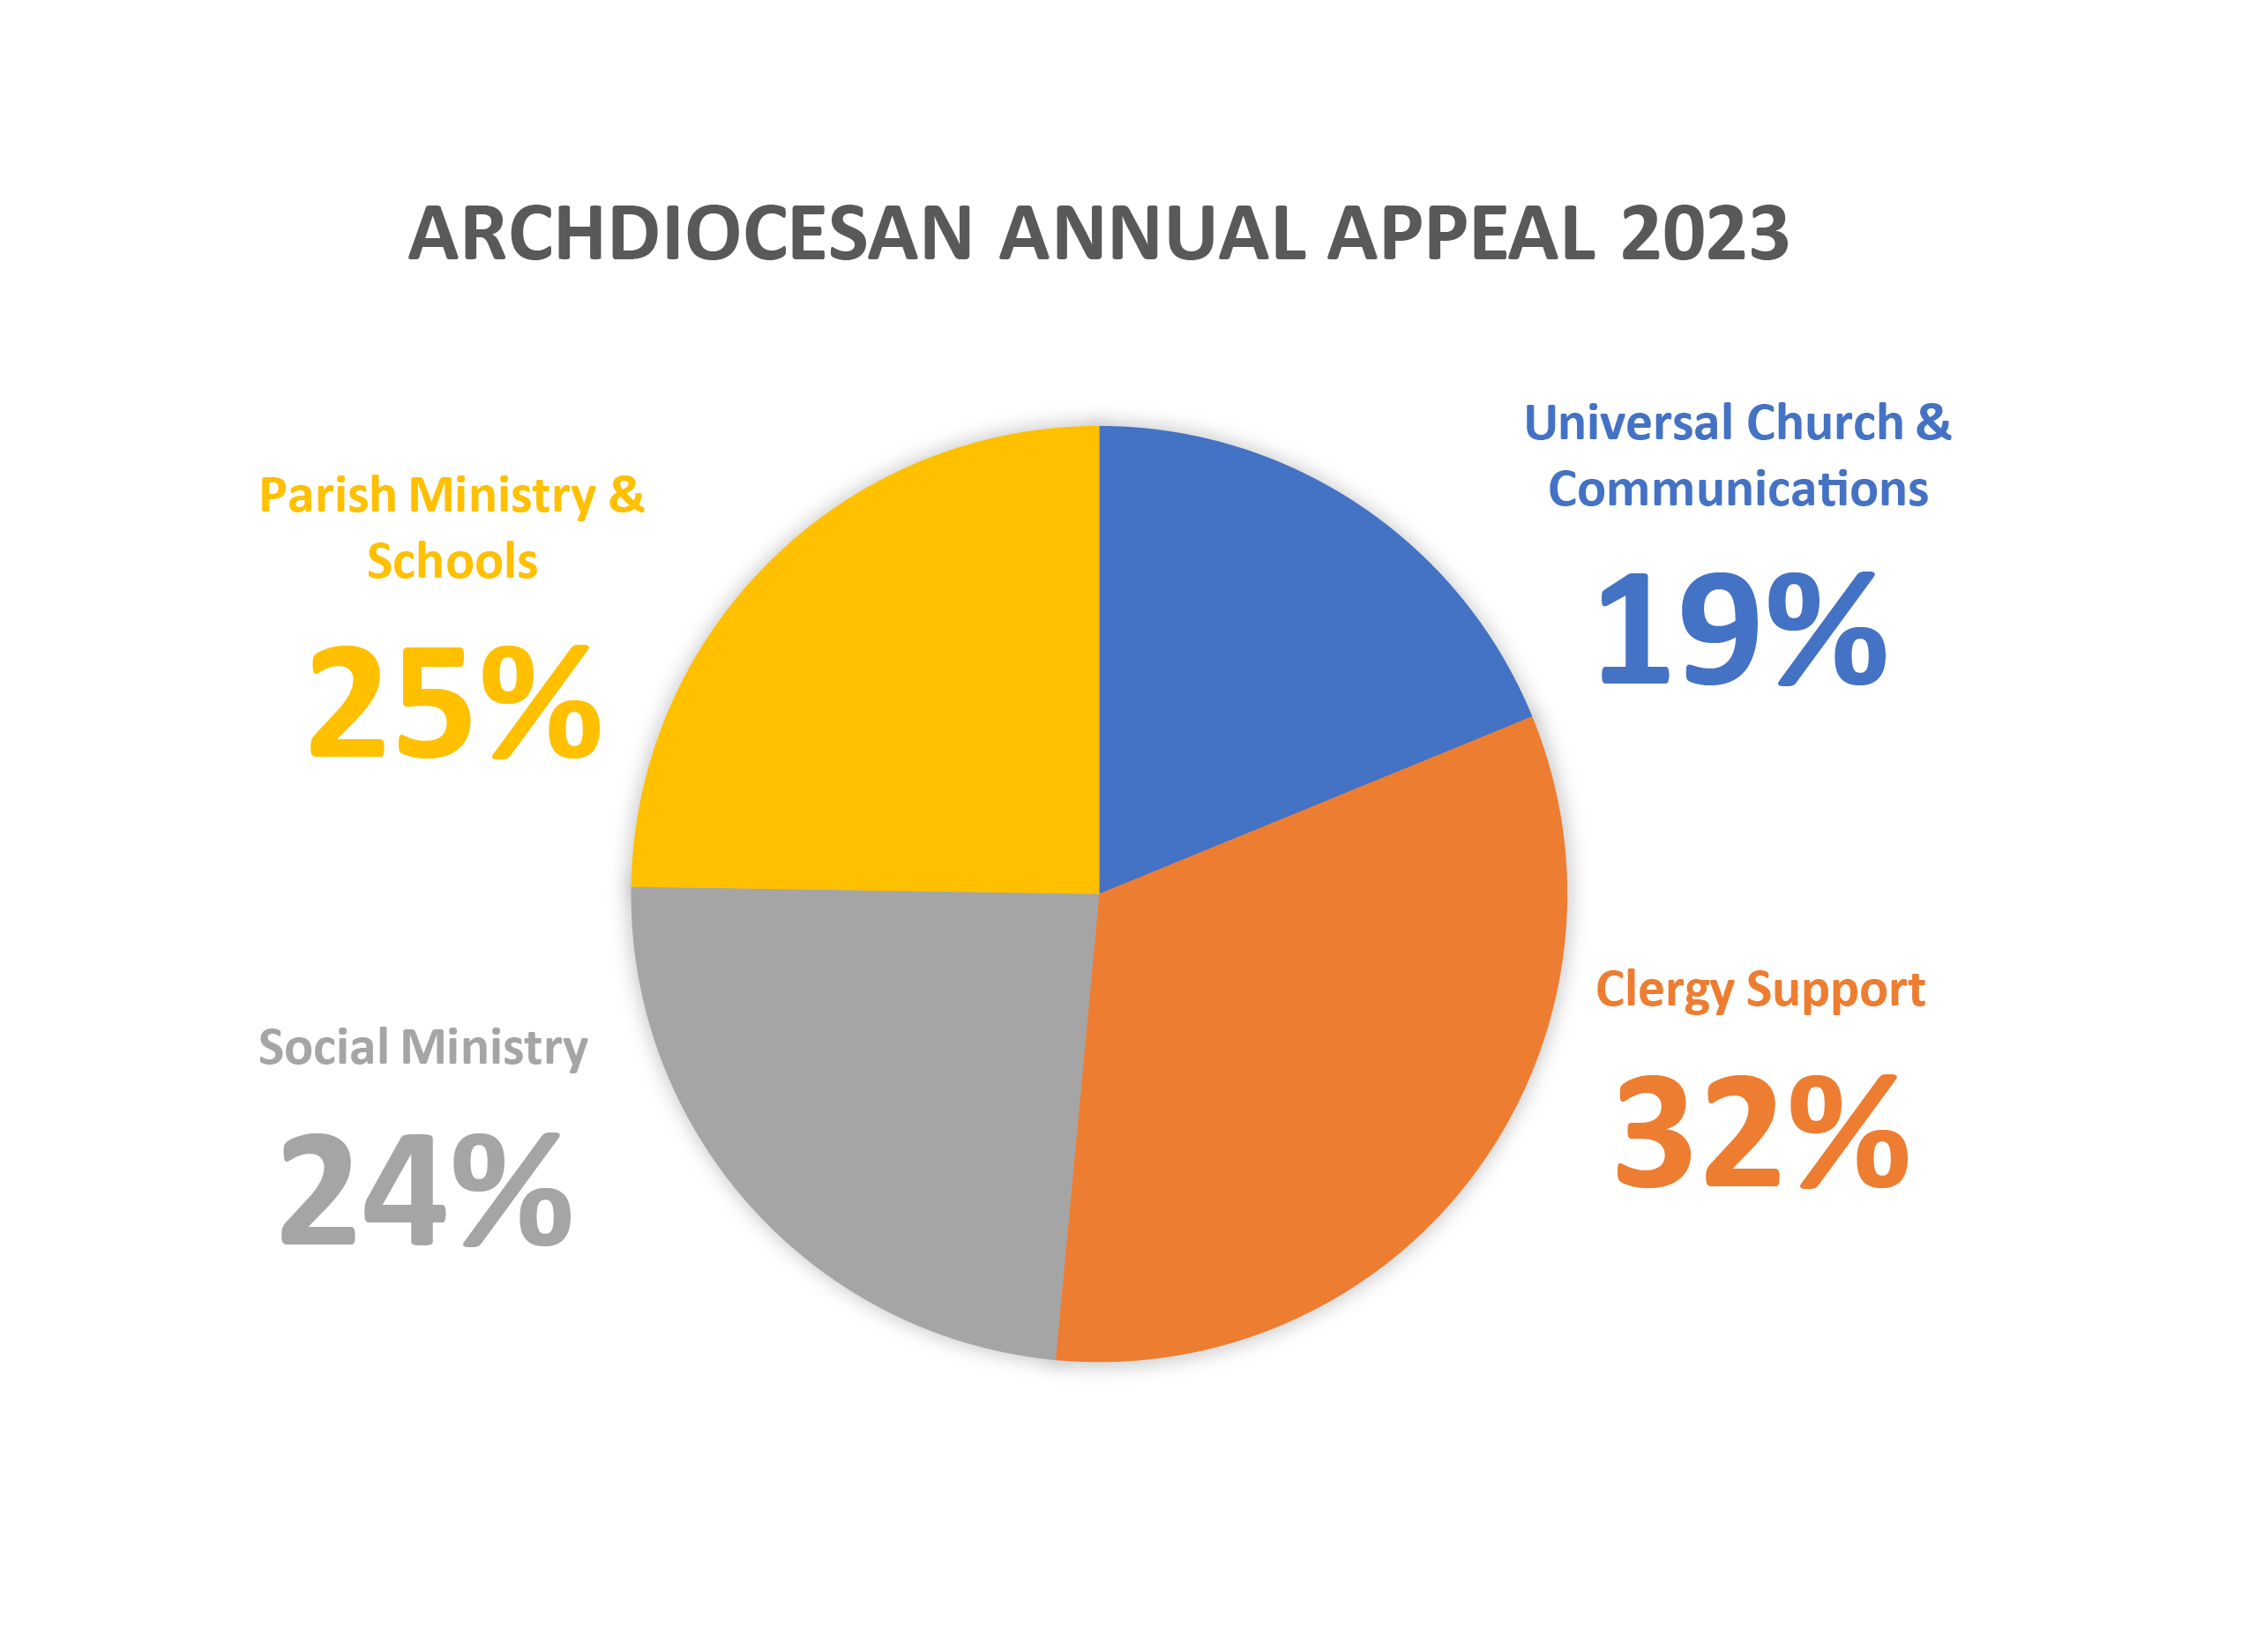 Archdiocesan Annual Appeal 2023 Goal